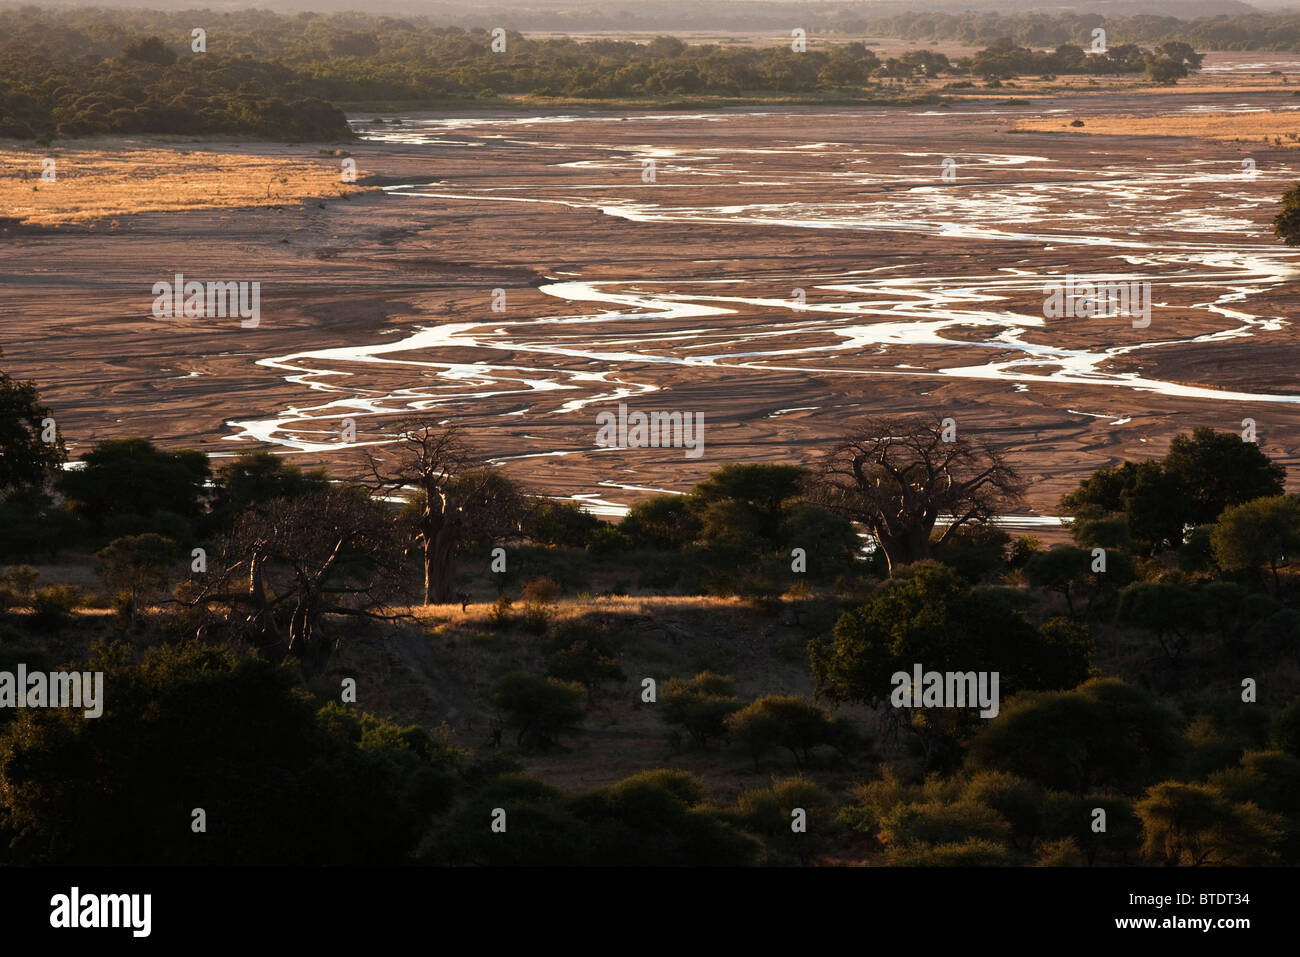 Scenic landscape of the Shashe river at its confluence with the Limpopo Stock Photo